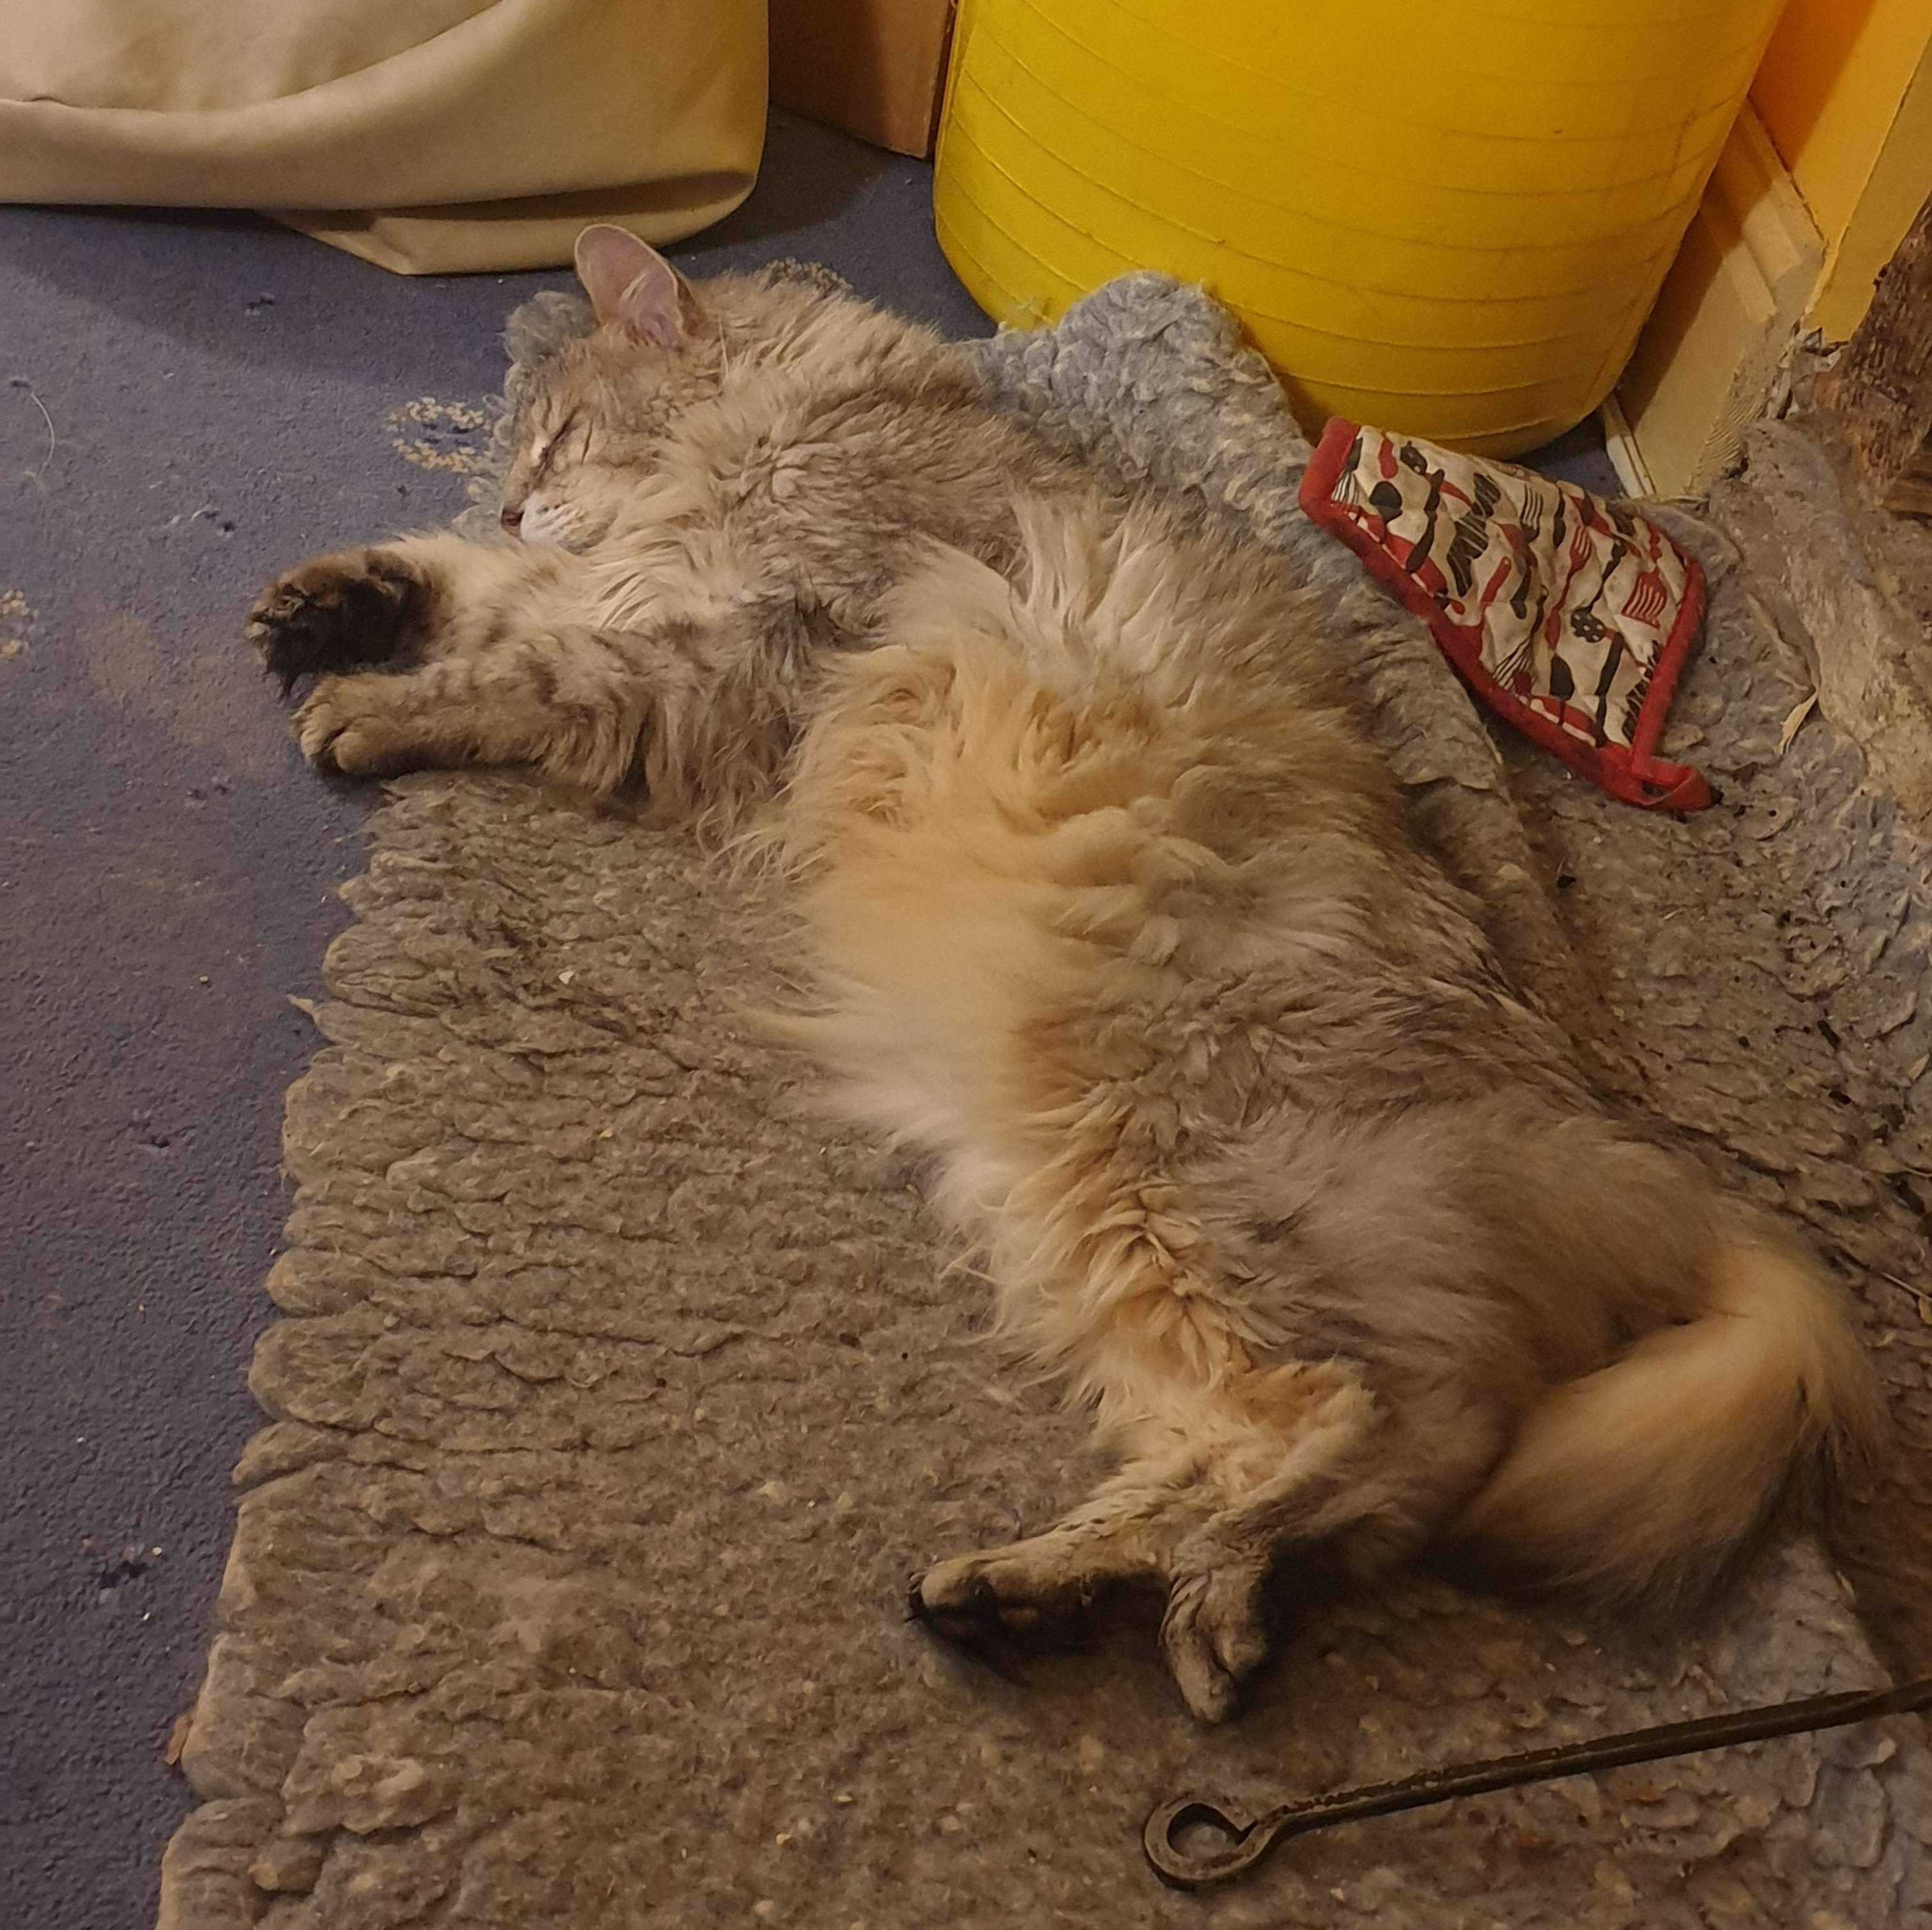 heimdall laid out and sleeping with his belly fluff exposed